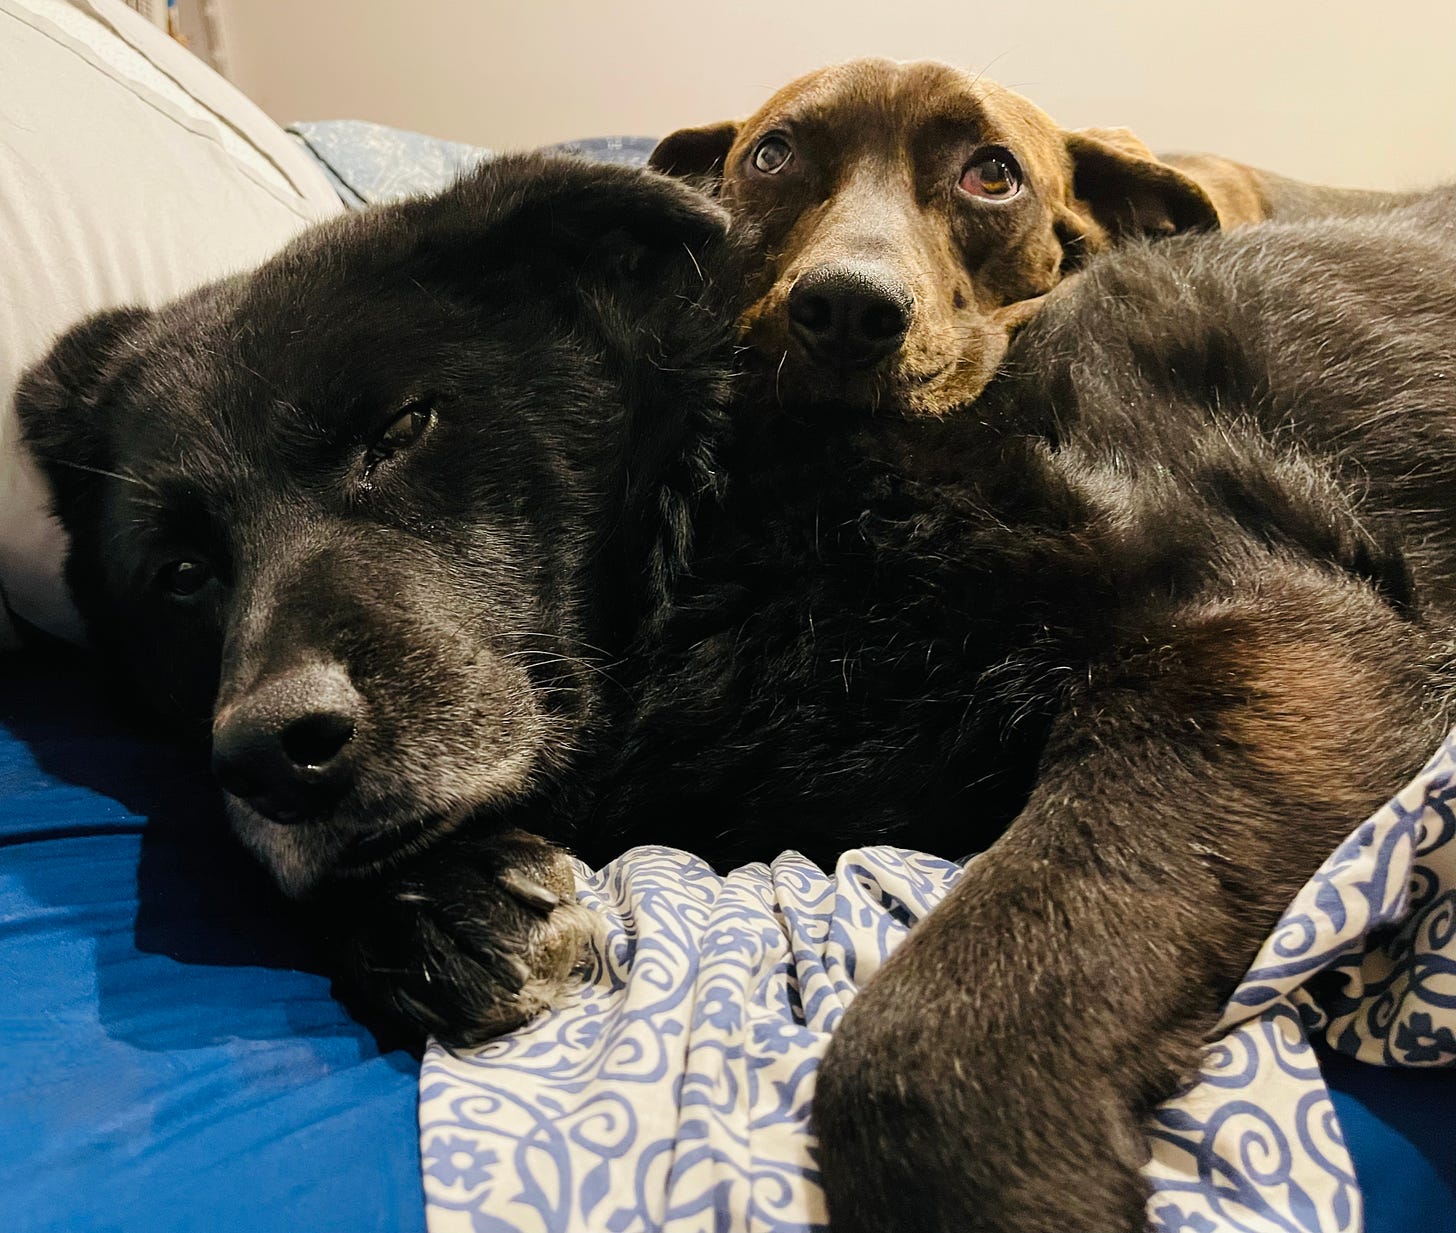 Dog on a bed, another dog has her head on his shoulder. 